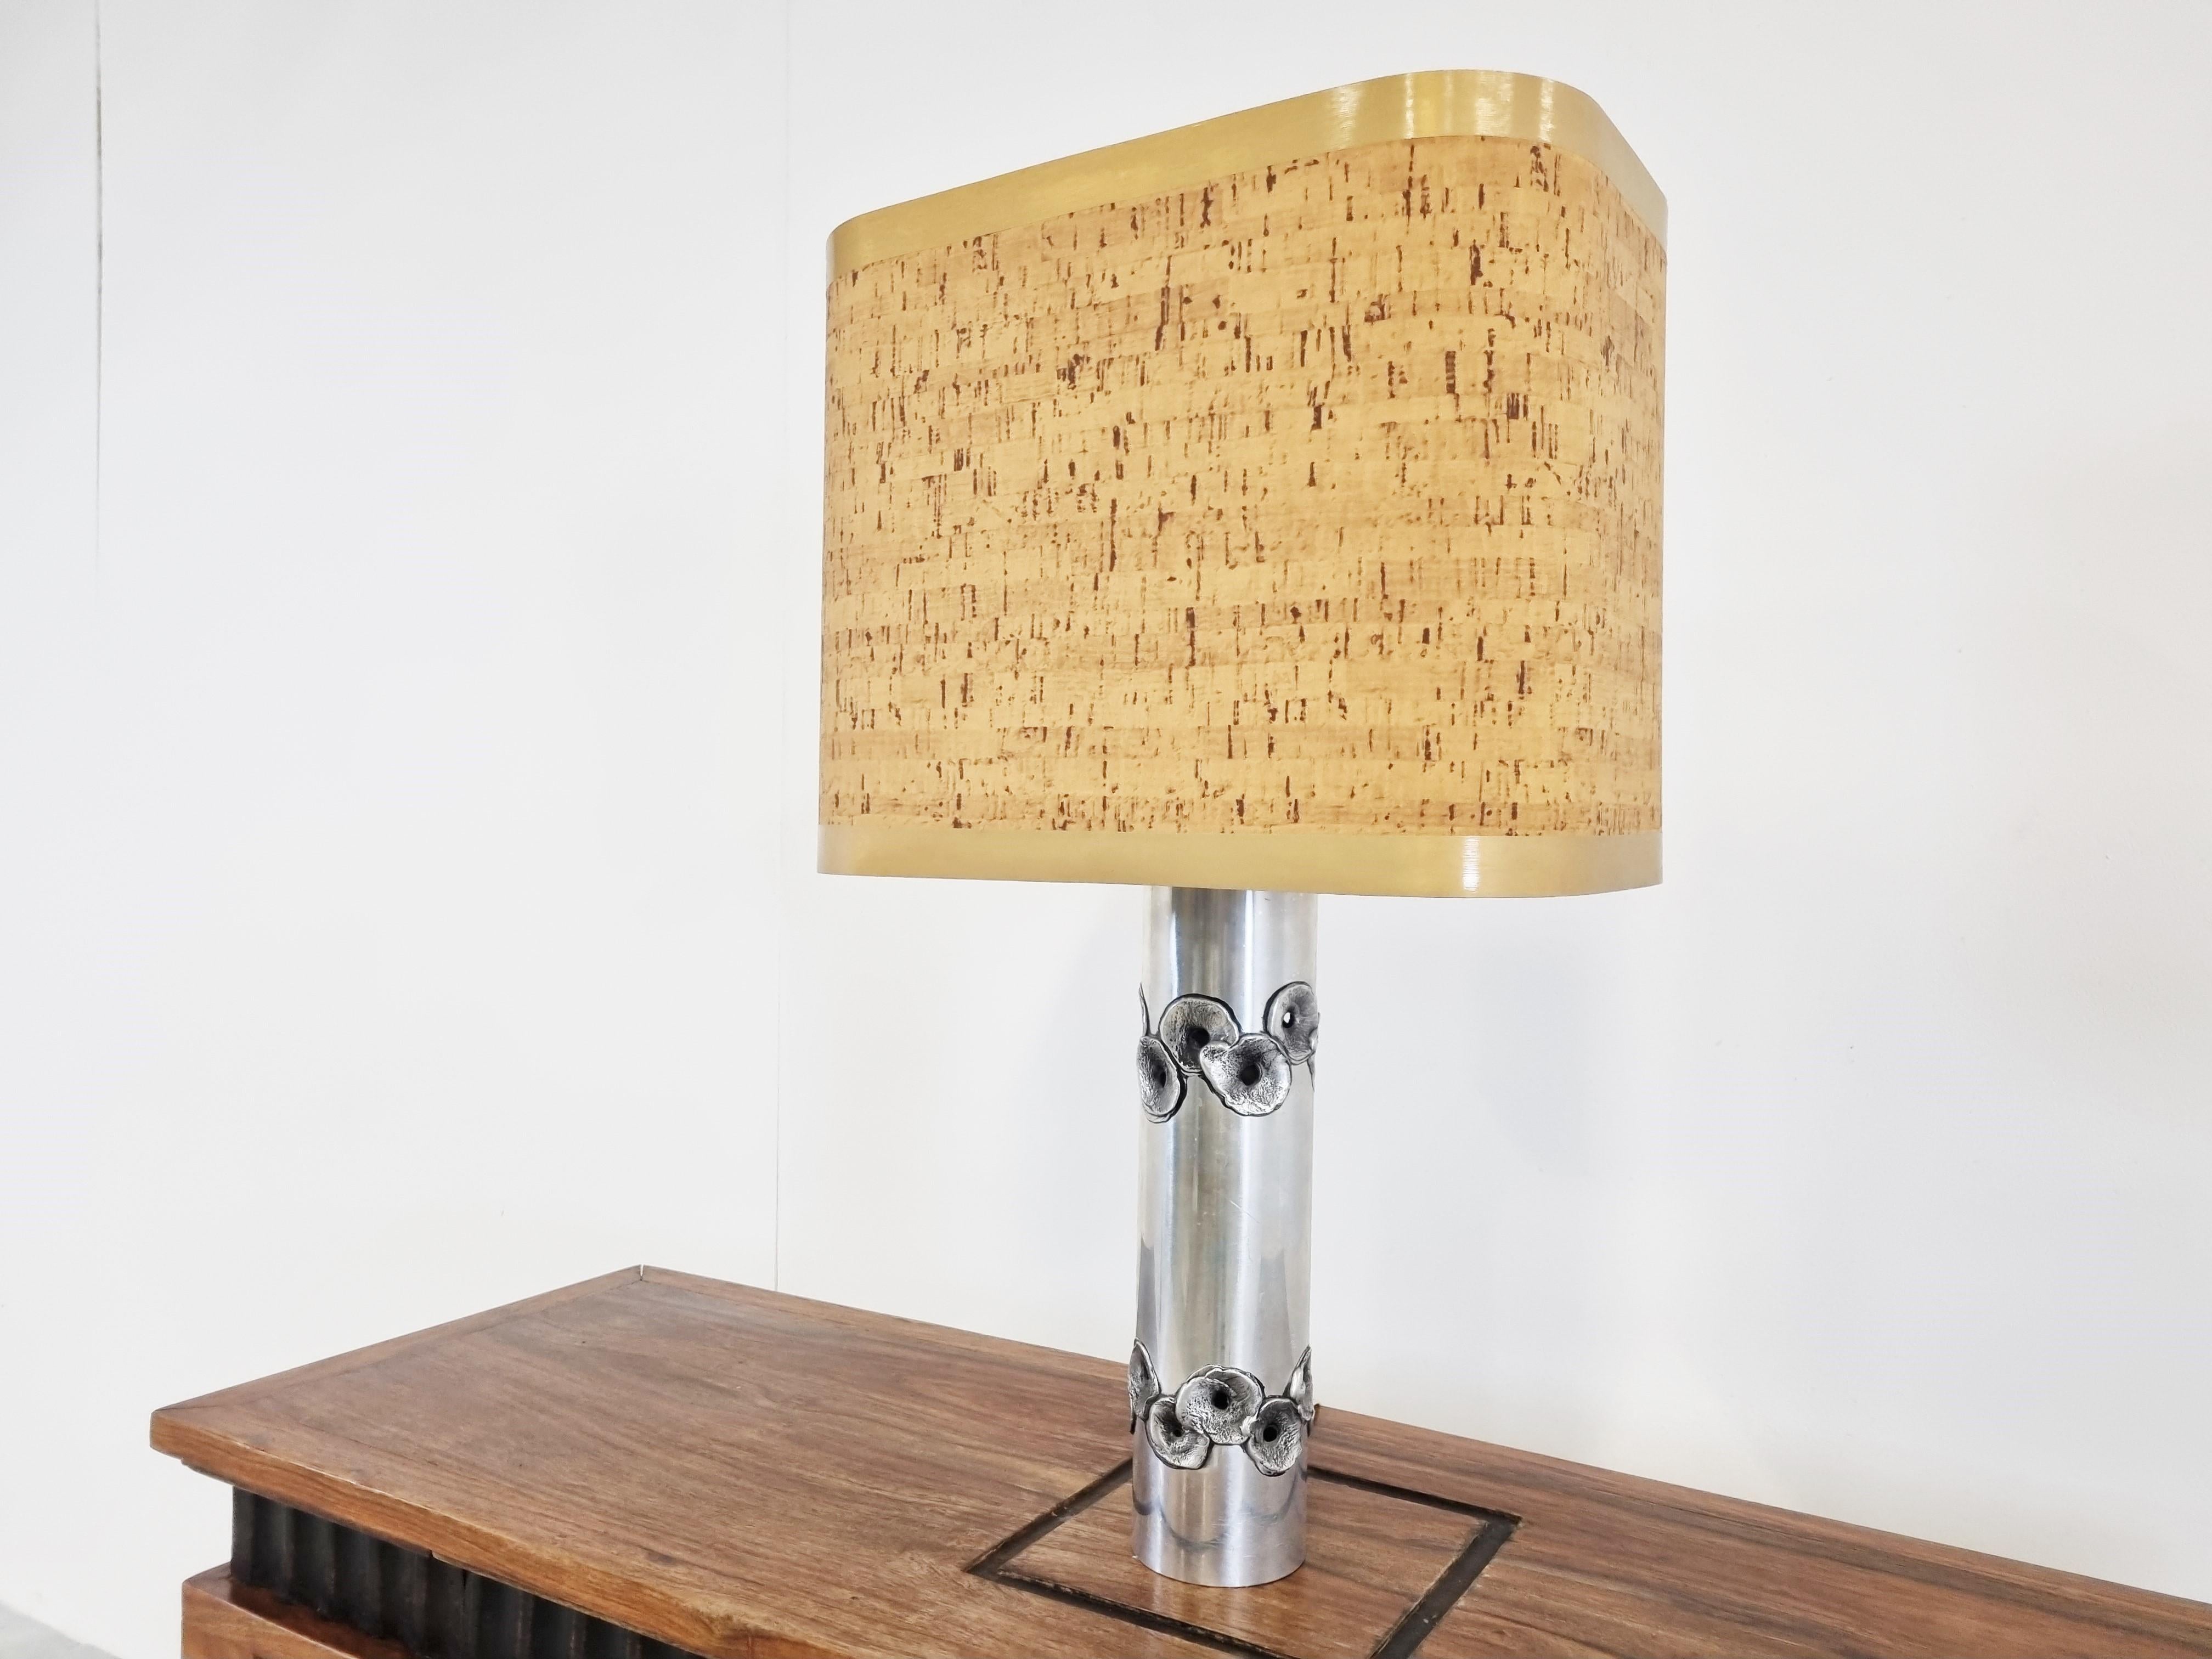 Stunning brutalist table lamp made from cast aluminum.

This lamp was made by belgian goldsmith Willy Luyckx for a belgian company called Aluclair.

Willy Luyckx was a goldsmith who worked for goldsmith Camille Colruyt before starting his own